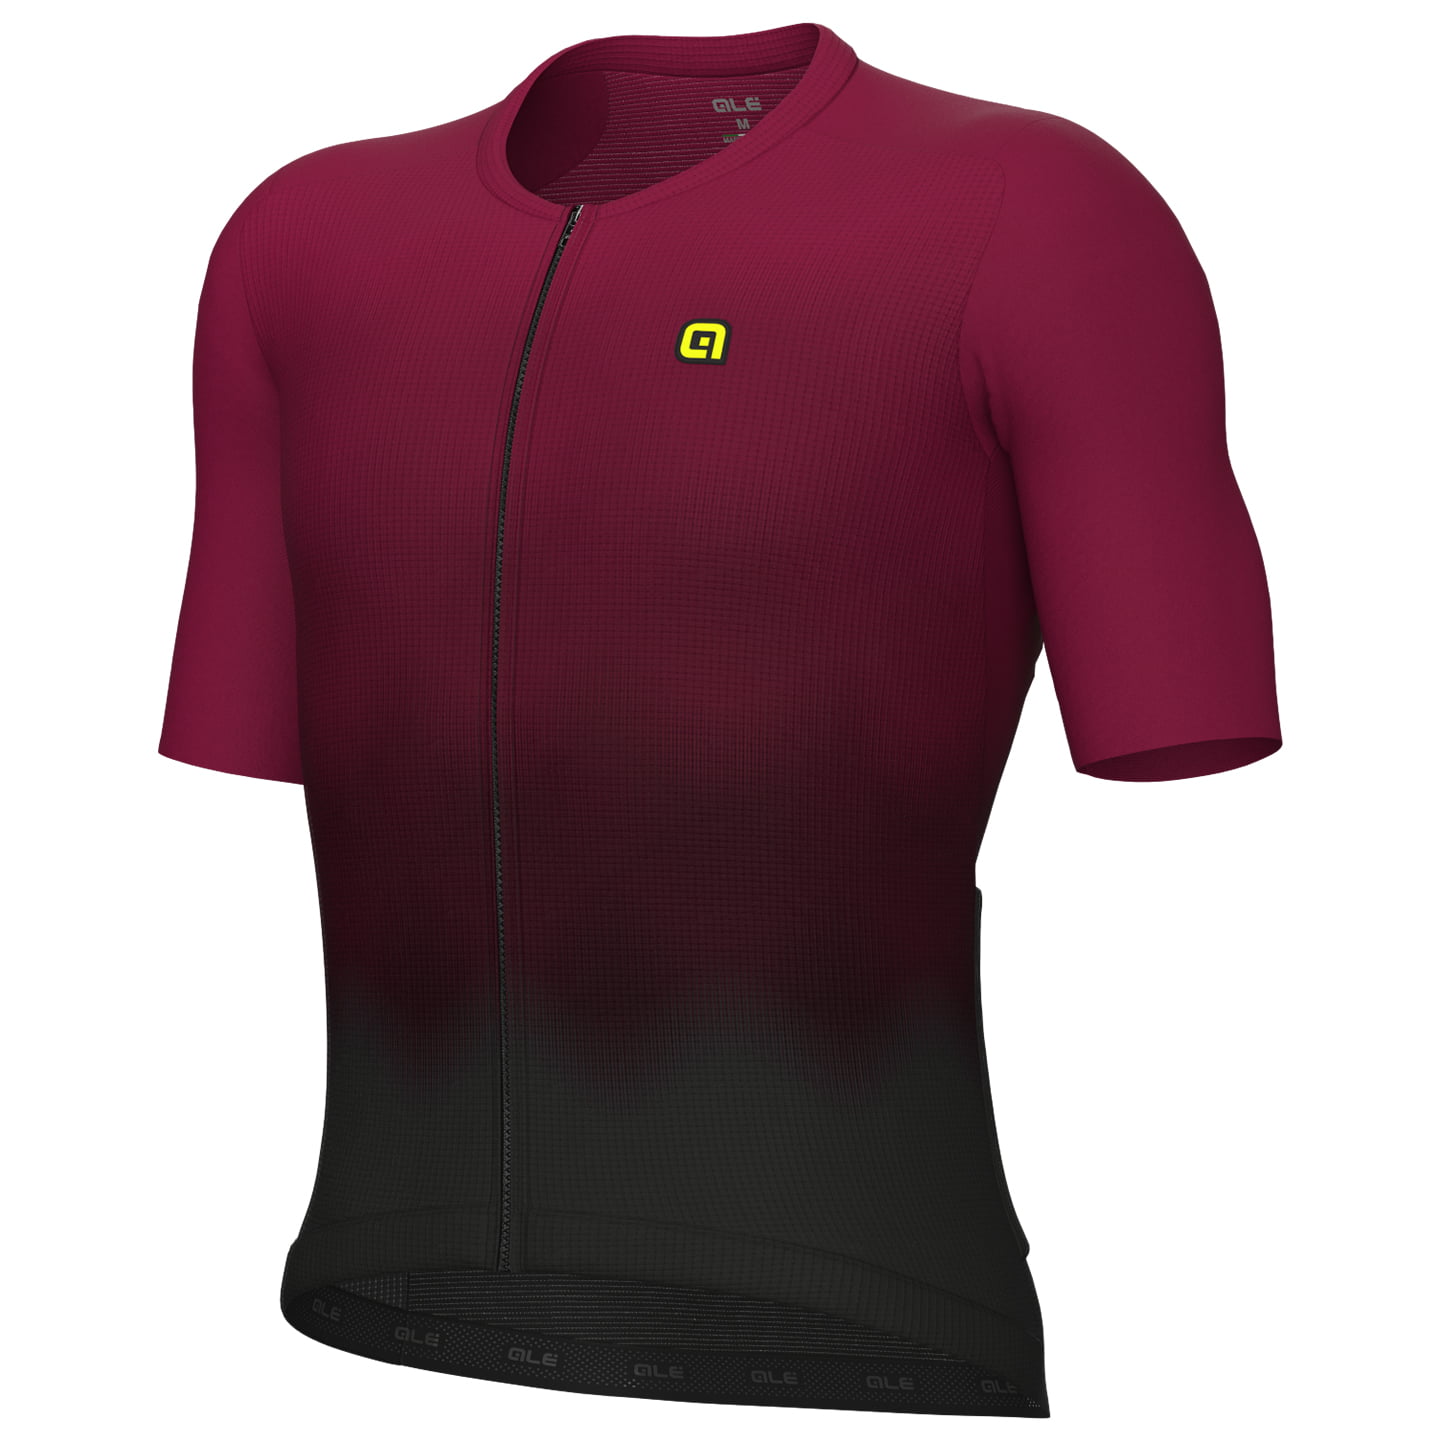 ALE Velocity 2.0 Short Sleeve Jersey, for men, size 2XL, Cycling jersey, Cycle clothing